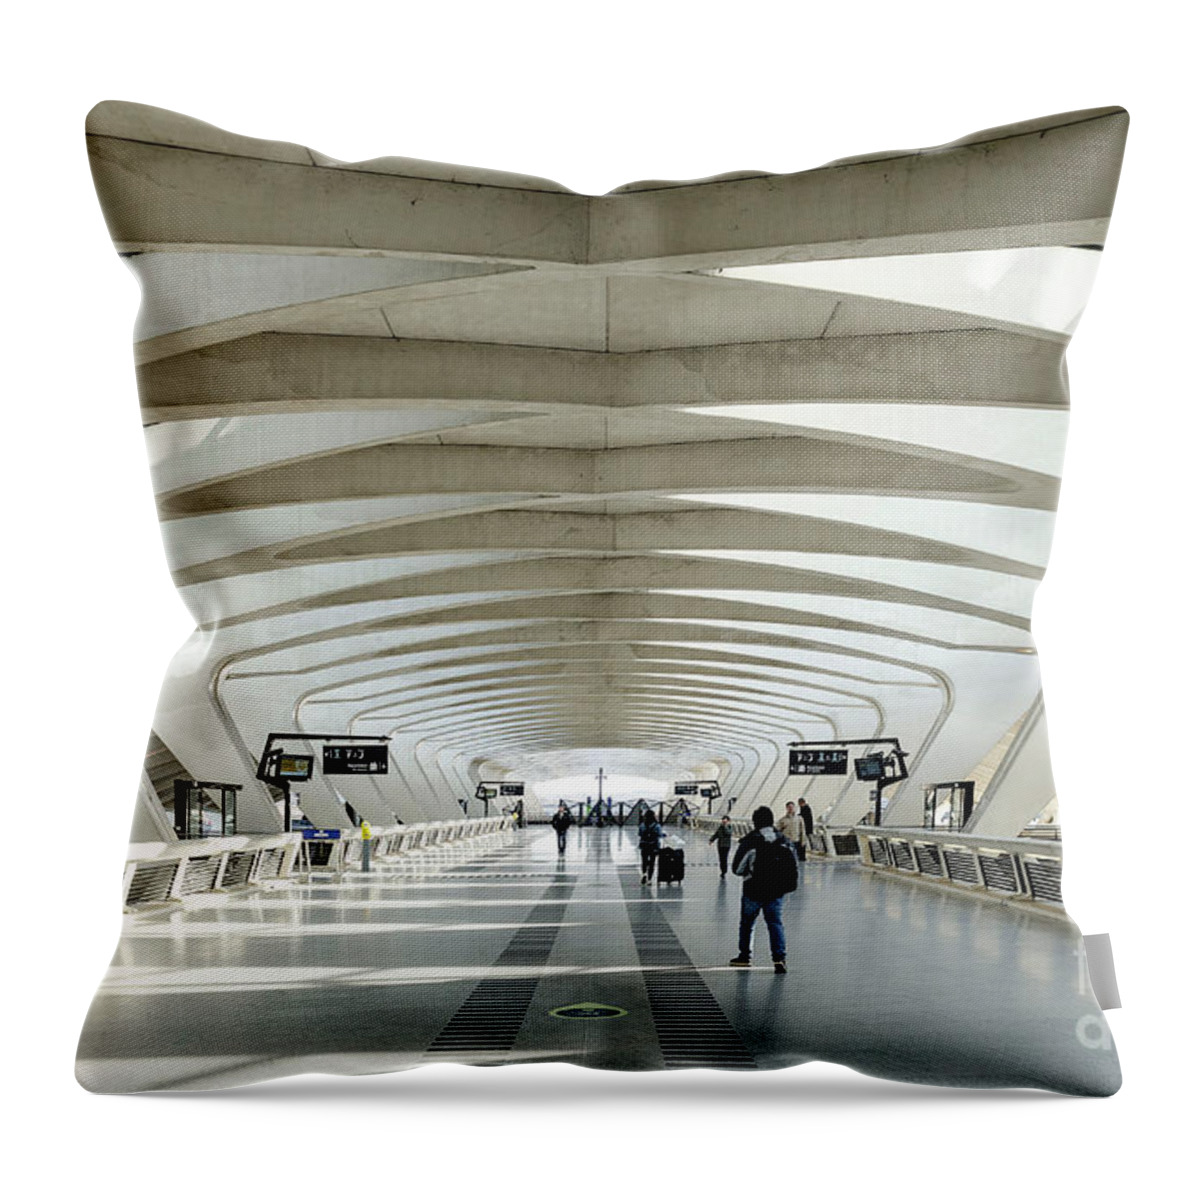 Tgv Throw Pillow featuring the photograph Famous Lyon Airport Tgv Railway Station Landmark Interior In Fra #3 by JM Travel Photography